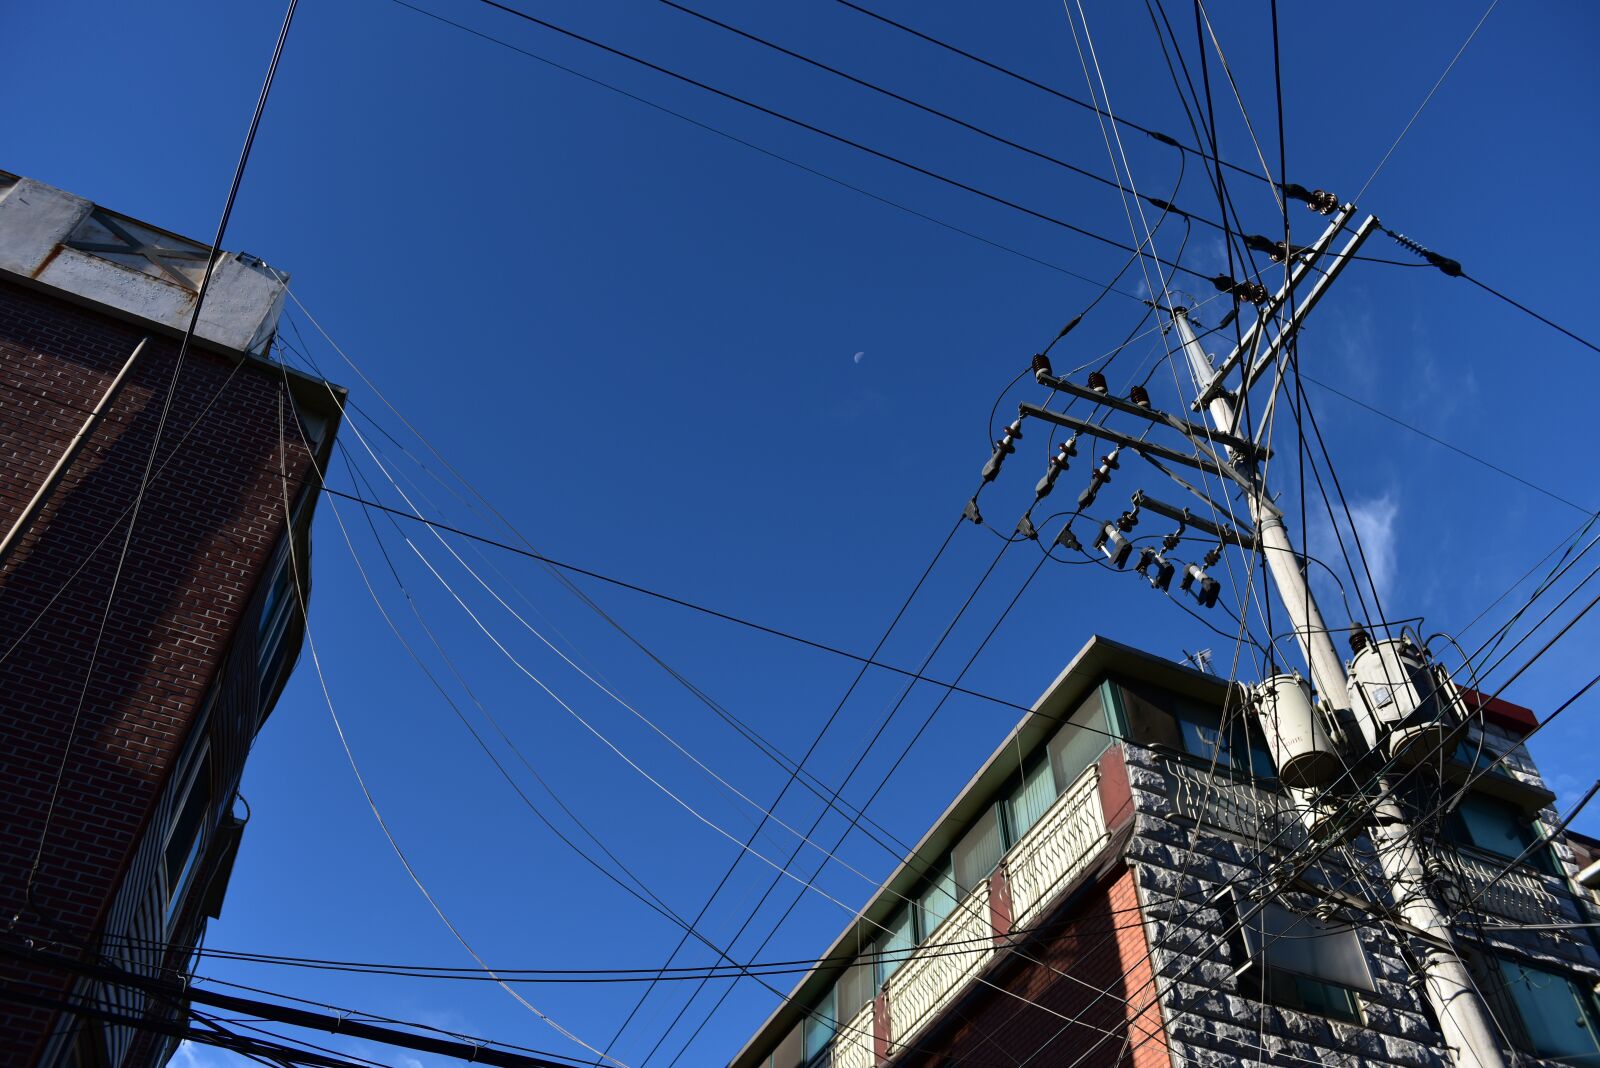 Nikon D810 sample photo. Sky, residential, electricity line photography